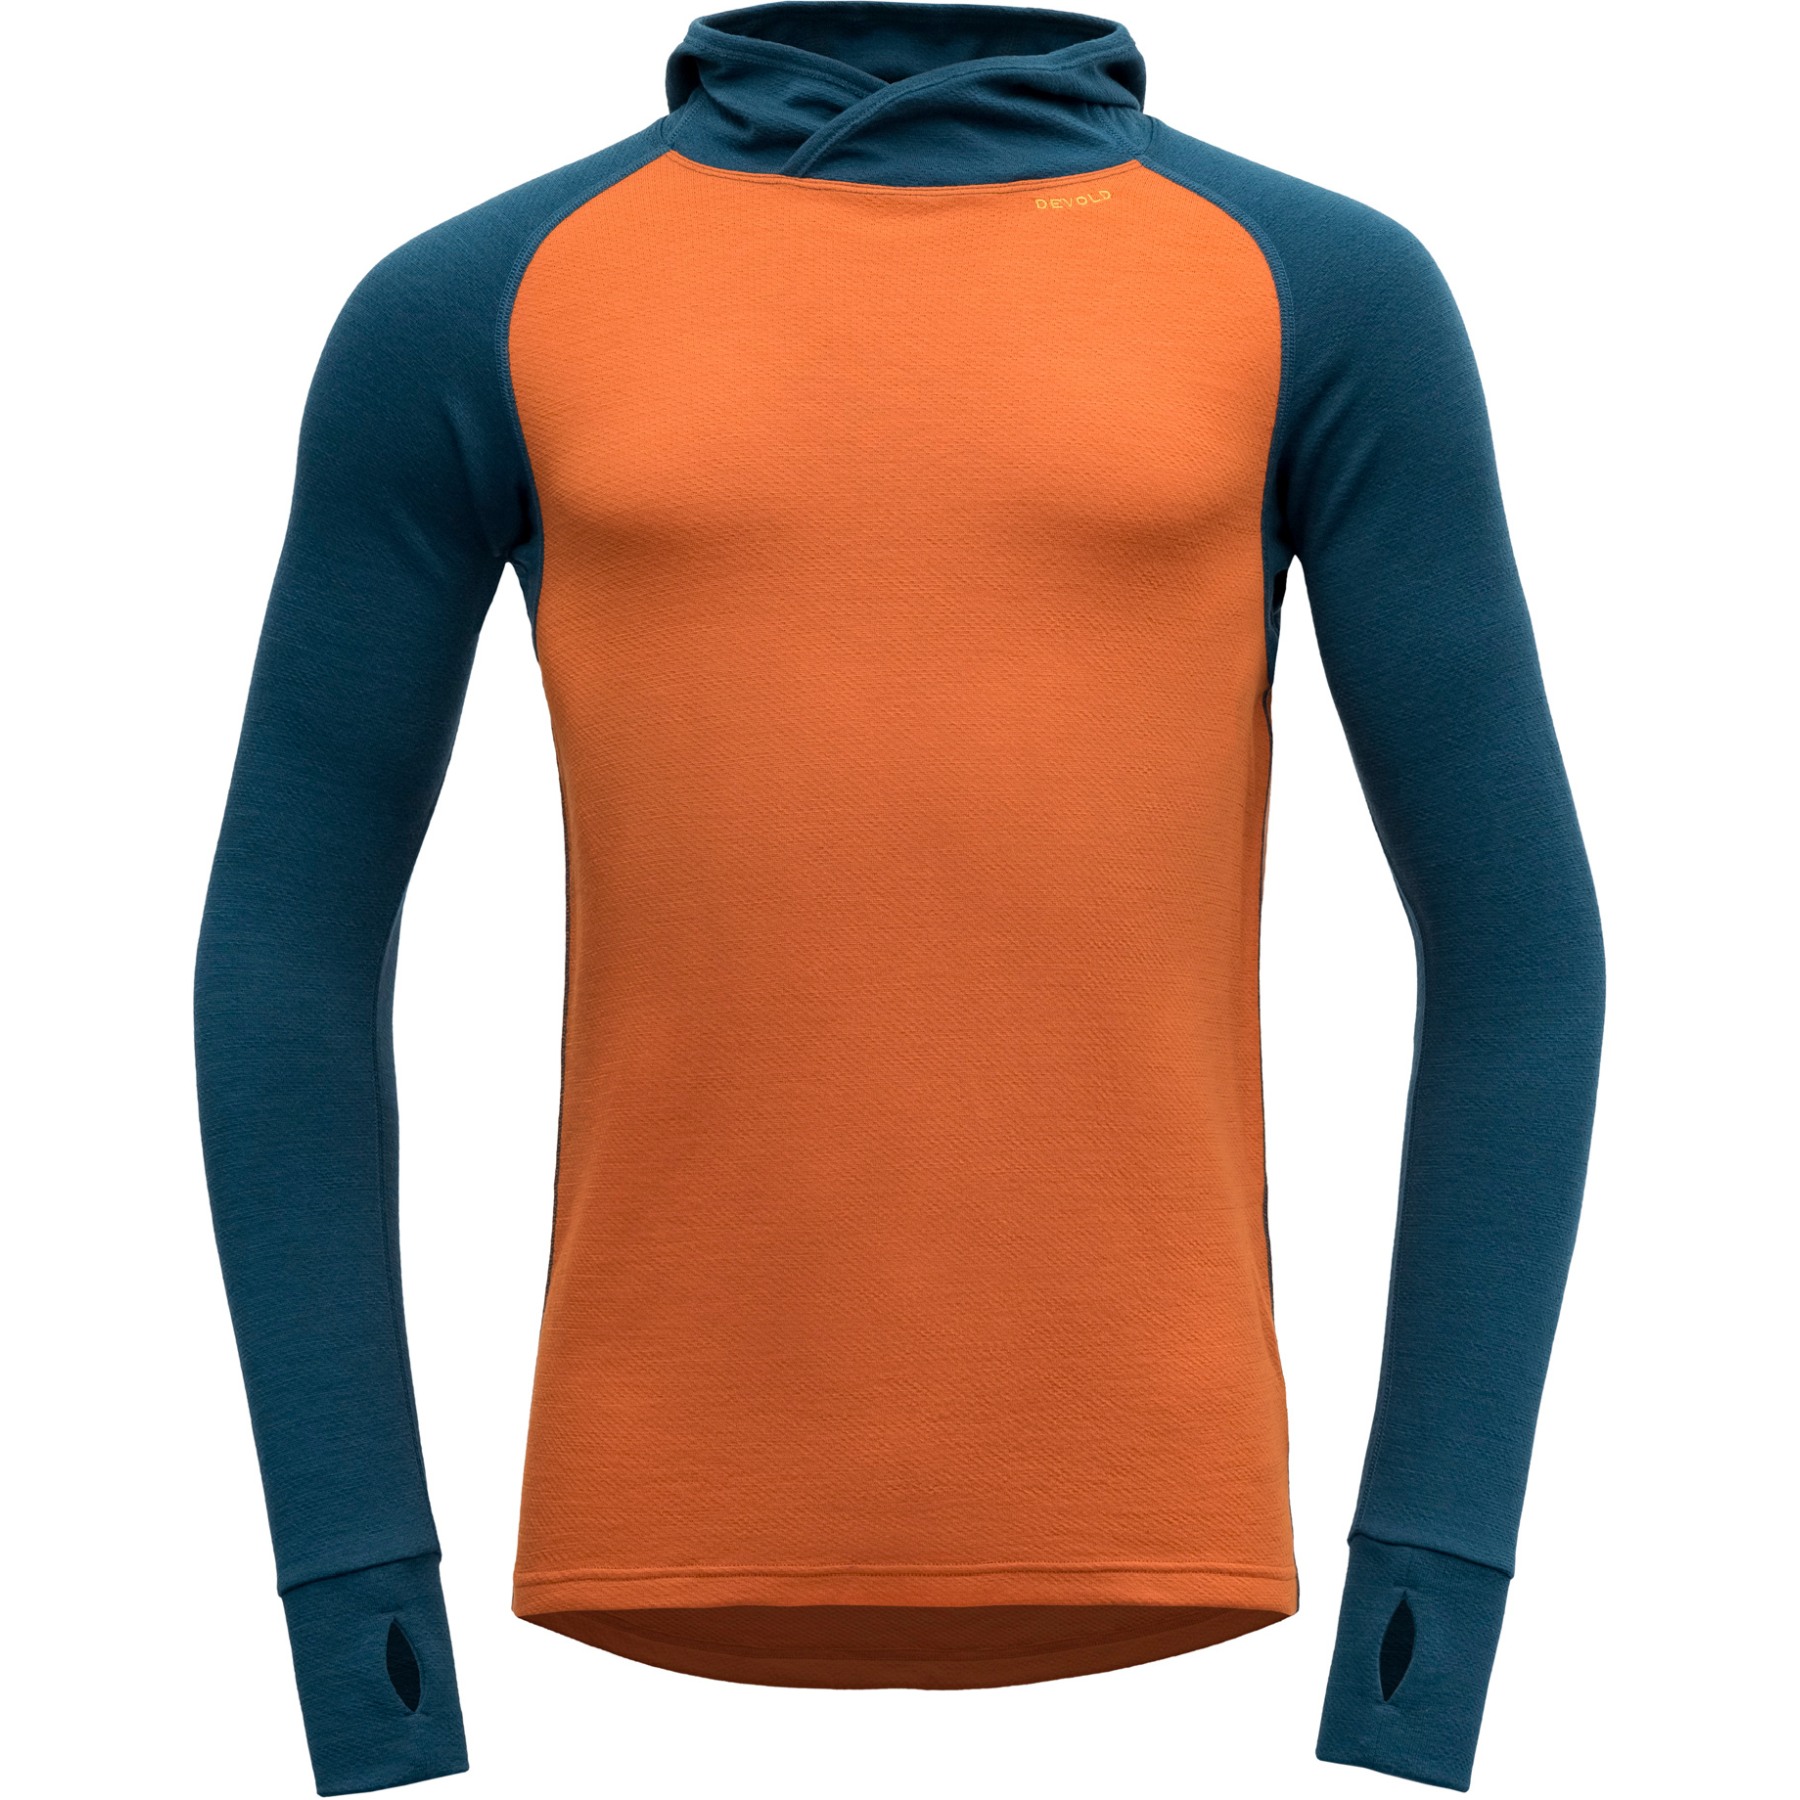 Picture of Devold Expedition Merino 235 Hoodie Men - 130 Flame/Flood